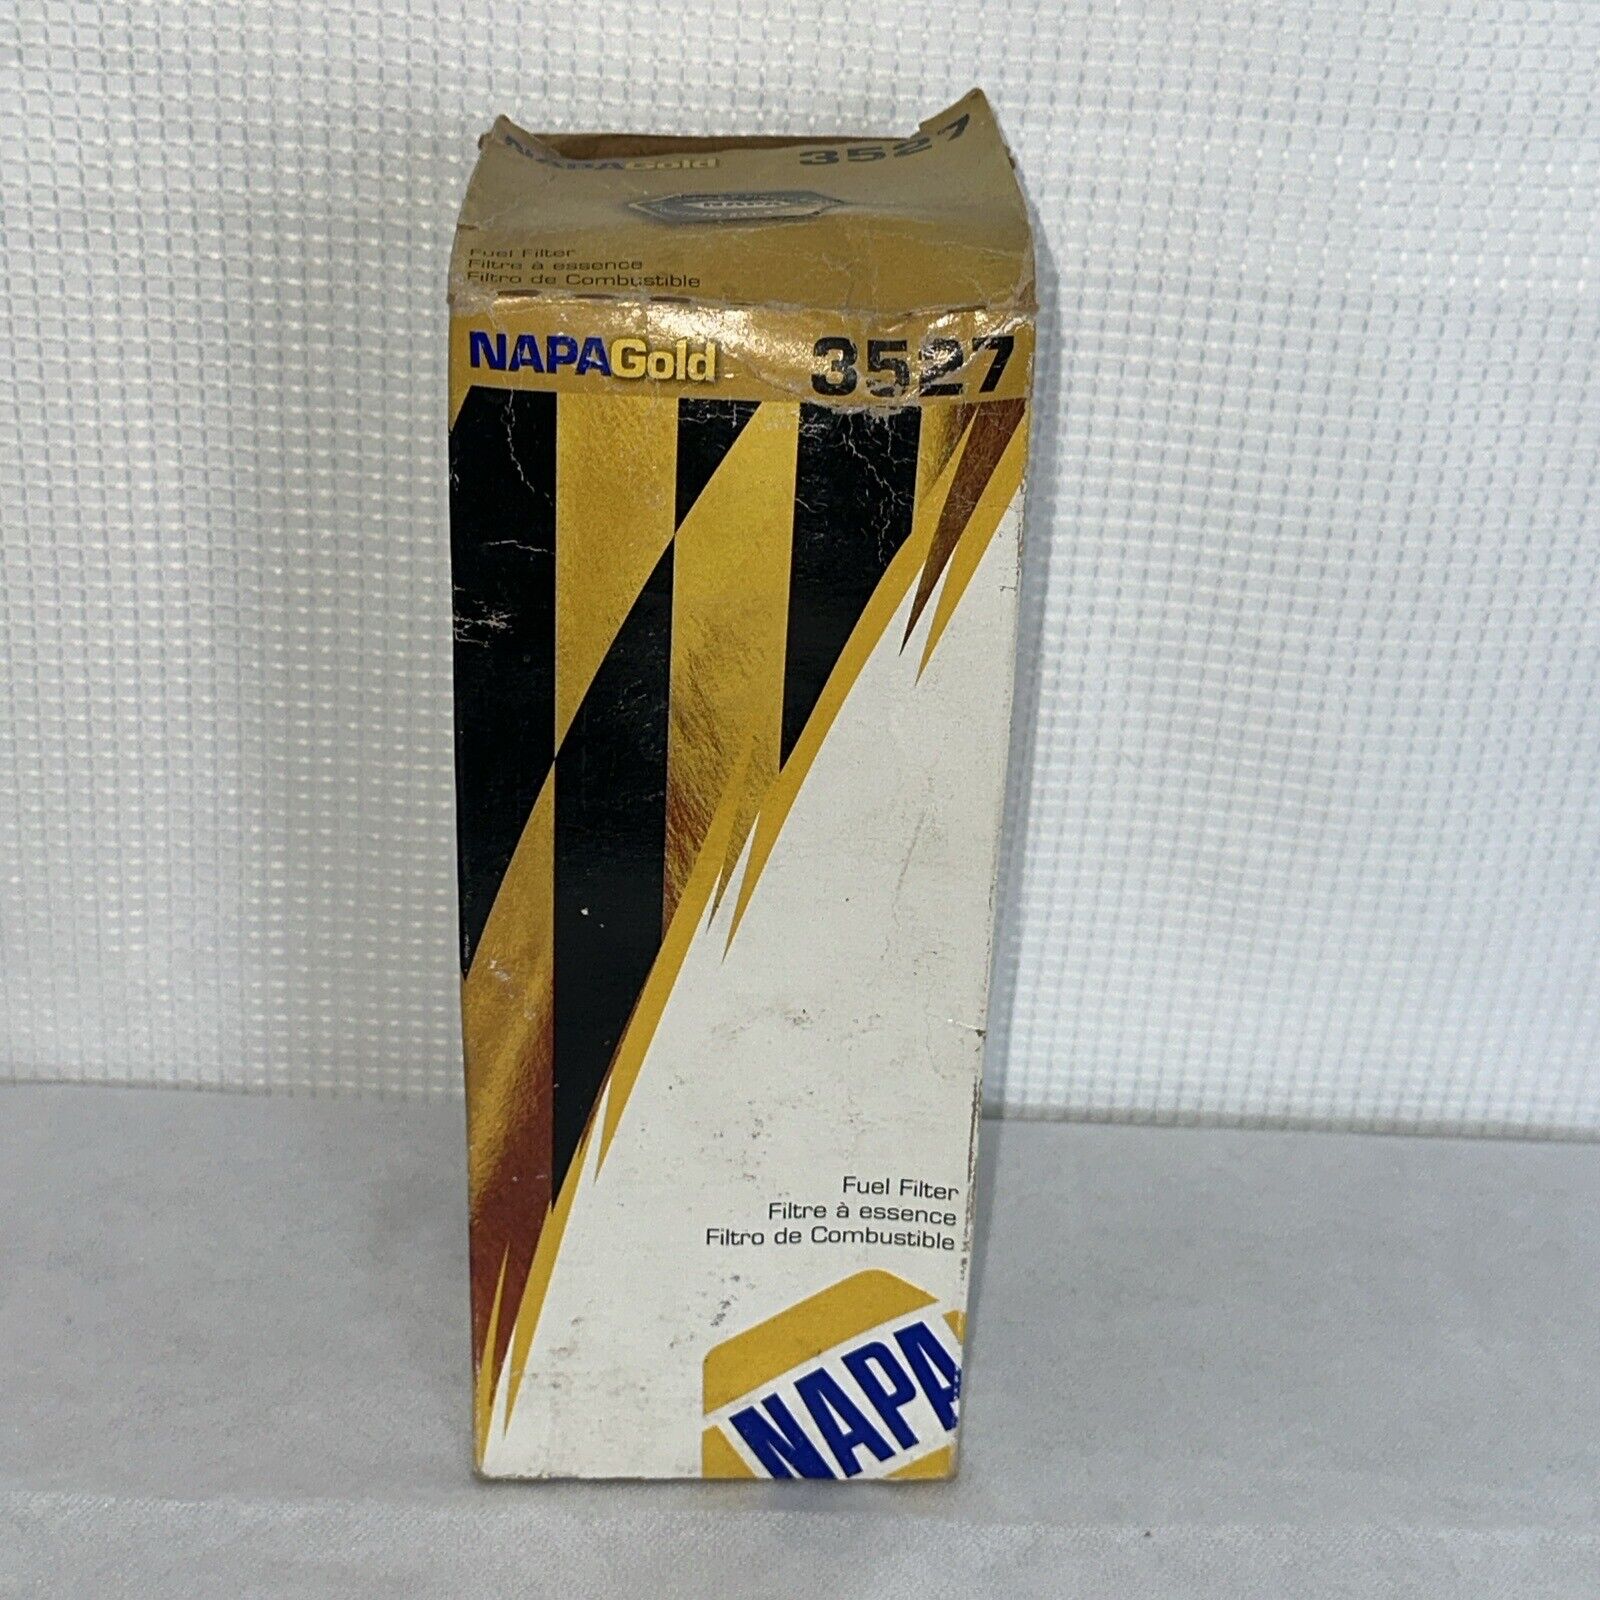 3527 NAPA Gold Fuel Filter High Efficiency New In Box